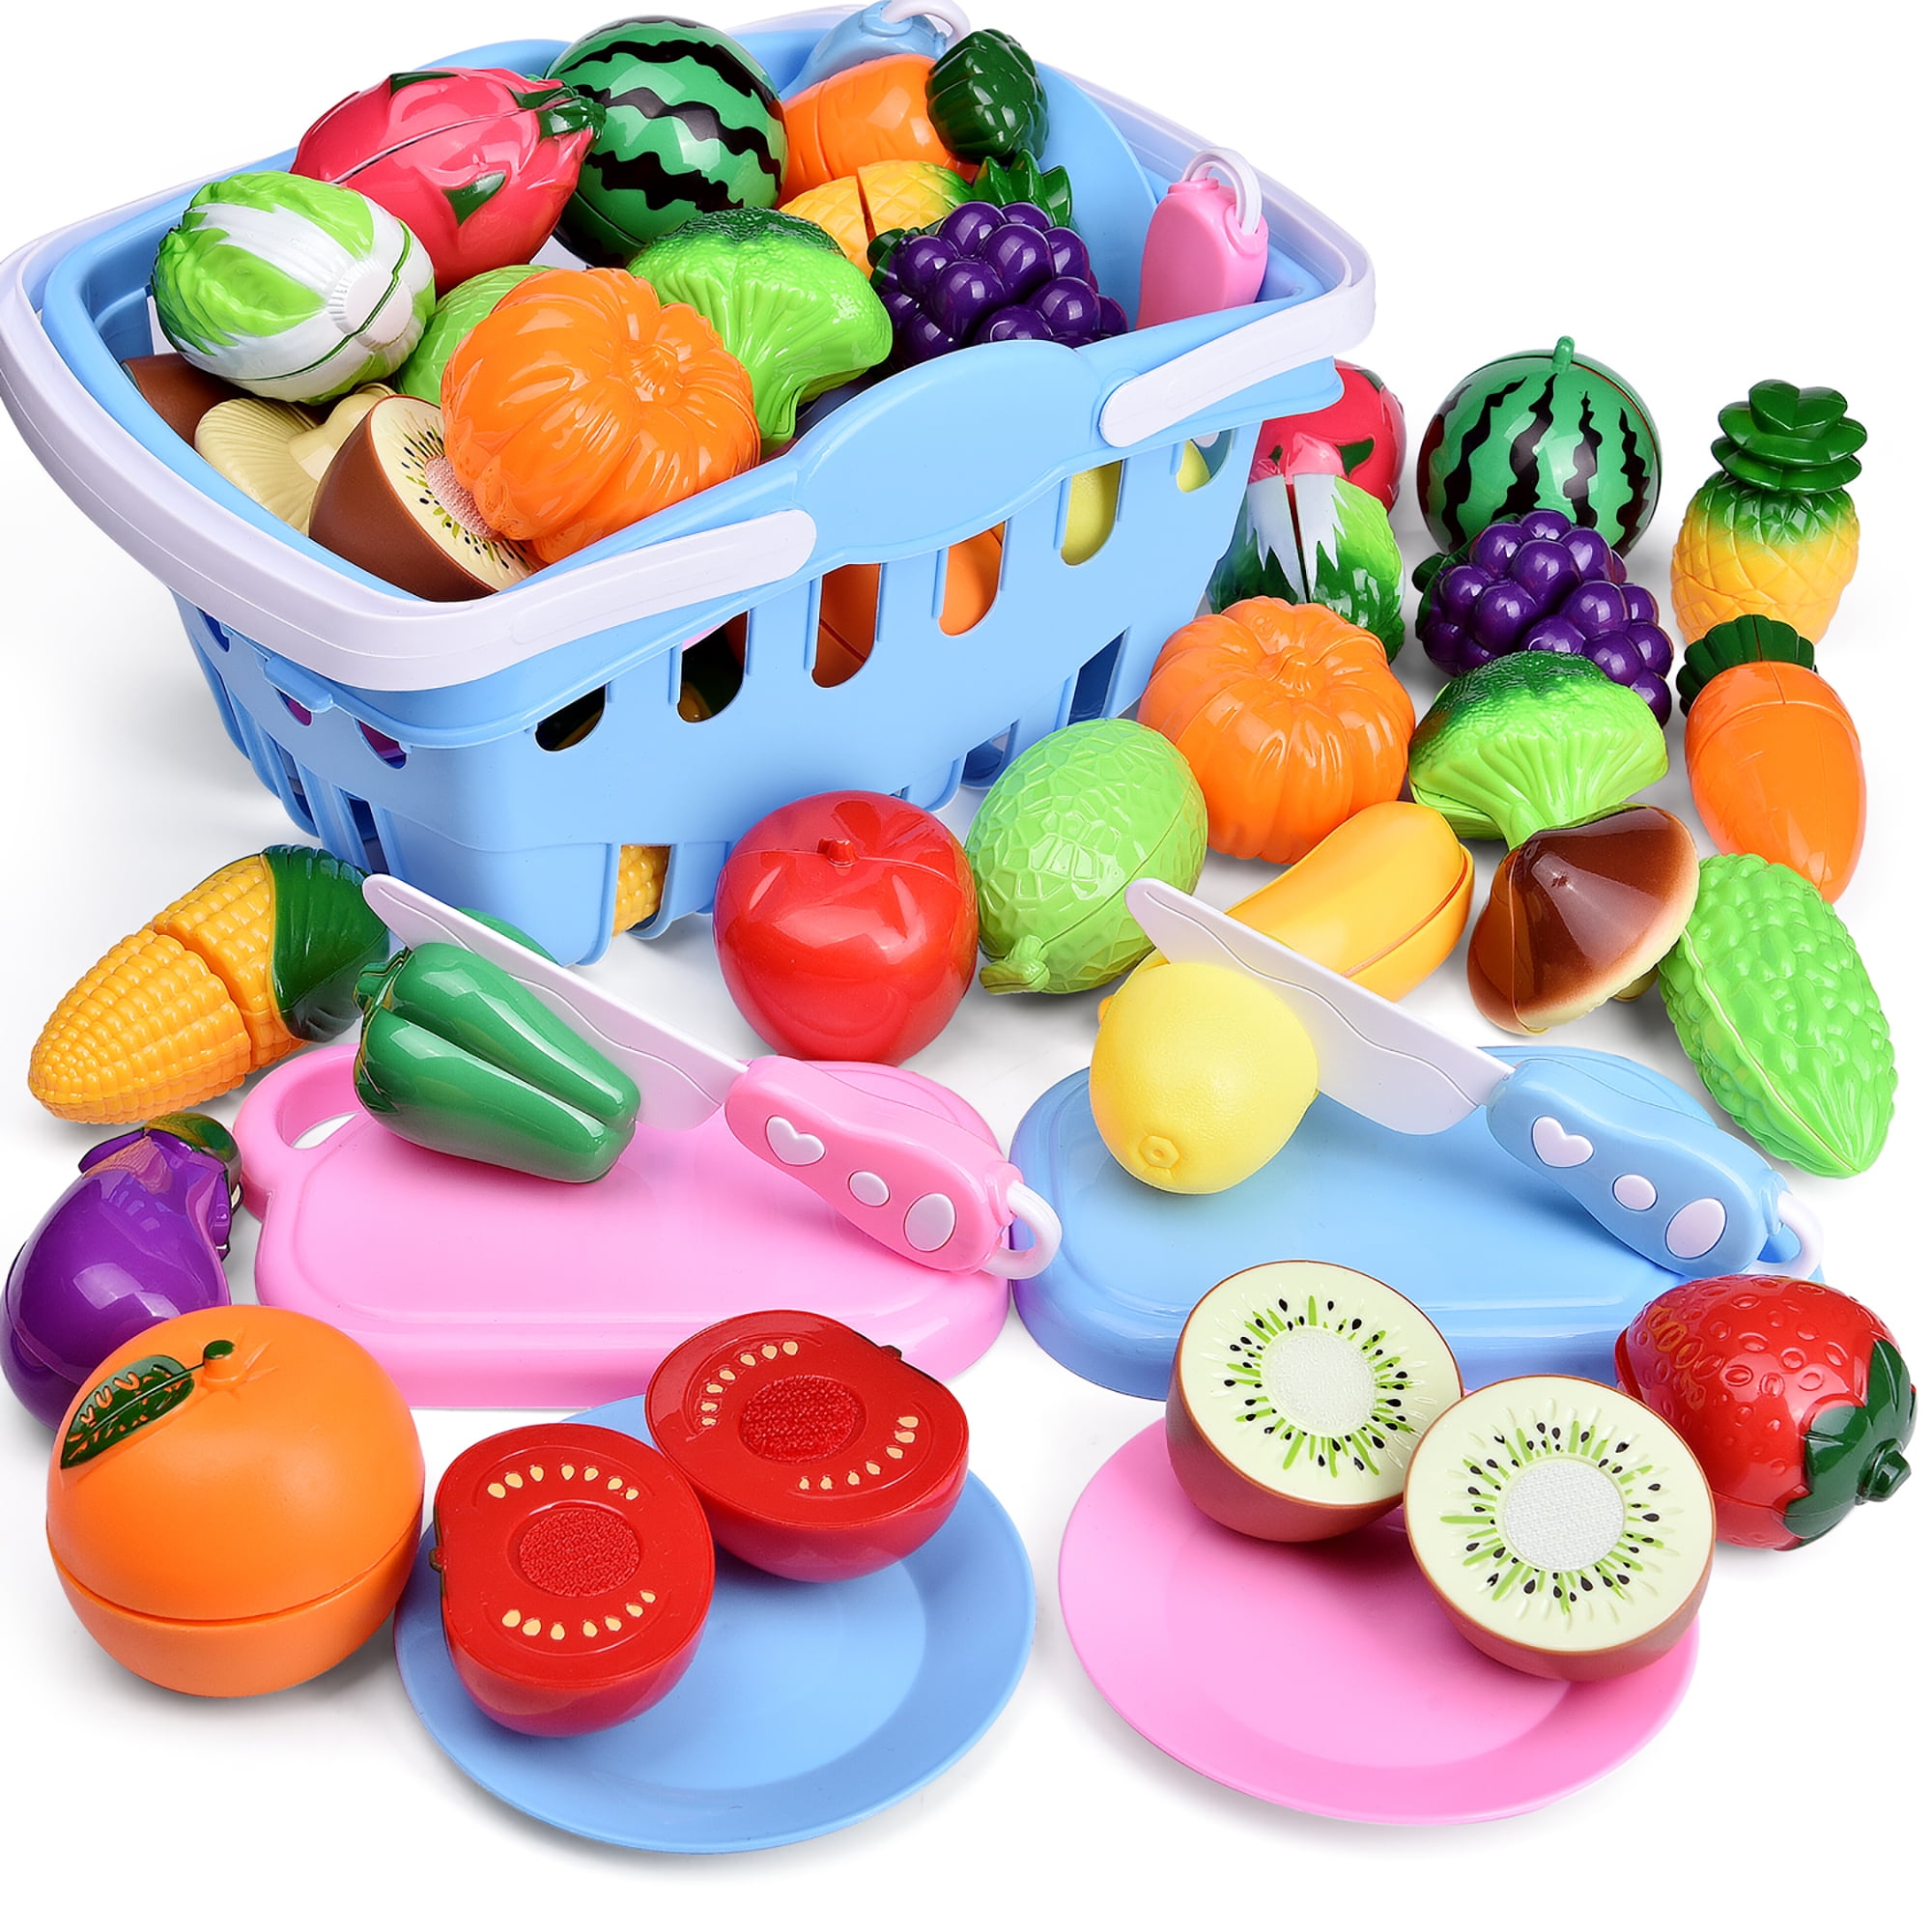 US Fruit Pretend Kitchen Cutting Set Fruit Vegetable Food Reusable Role Play Toy 